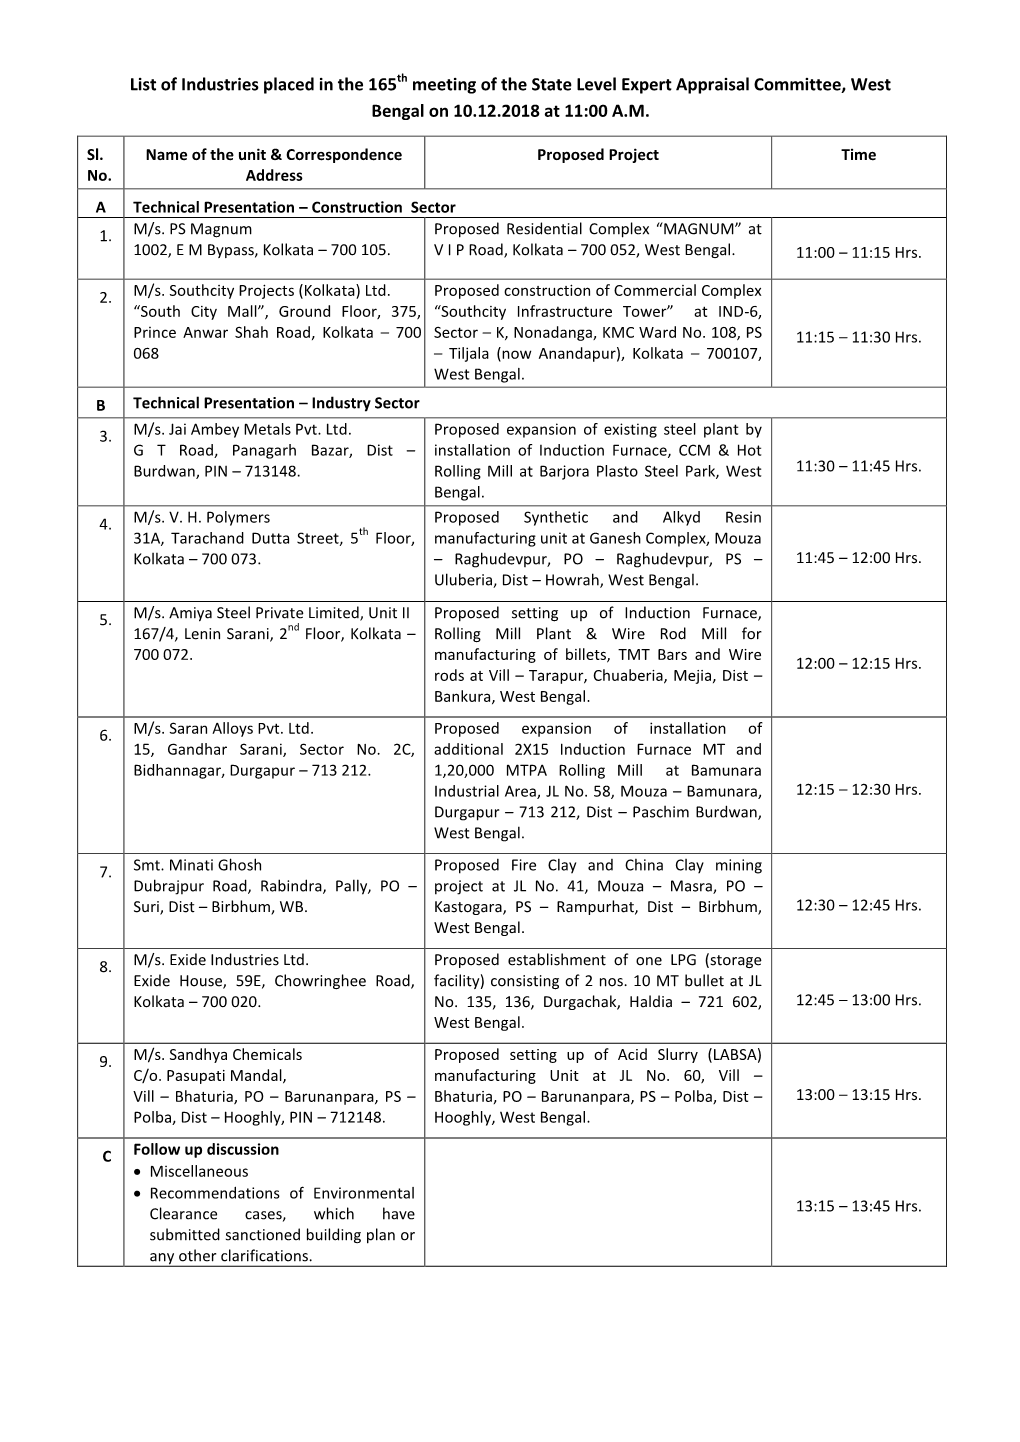 List of Industries Placed in the 165Th Meeting of the State Level Expert Appraisal Committee, West Bengal on 10.12.2018 at 11:00 A.M